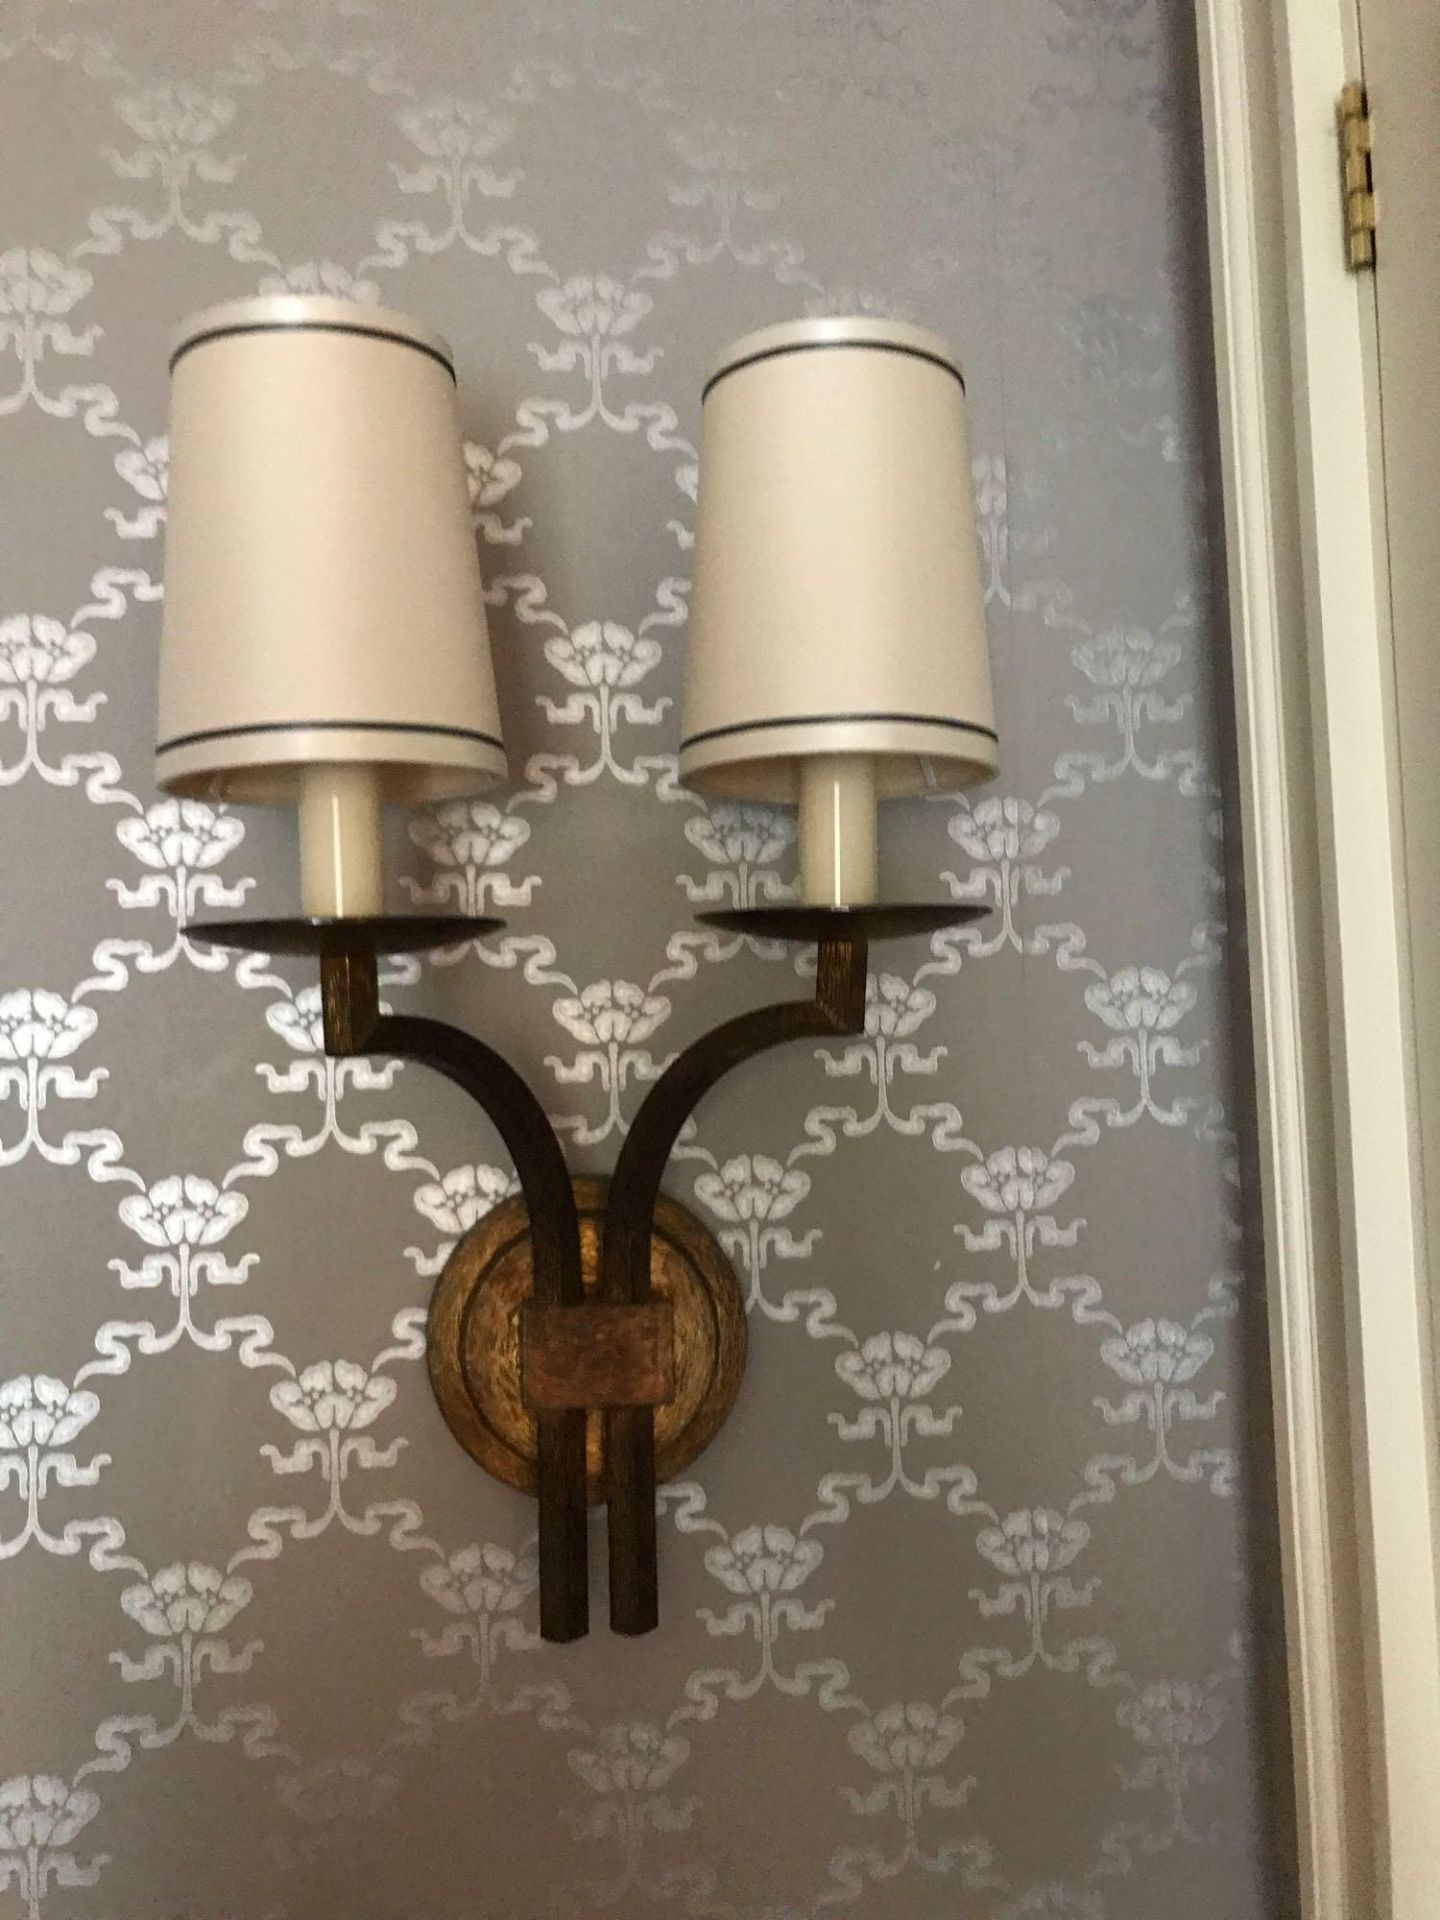 A Pair Of Dernier And Hamlyn Twin Arm Antique Bronzed Wall Sconces With Shade 51cm Room 610 - Image 2 of 2